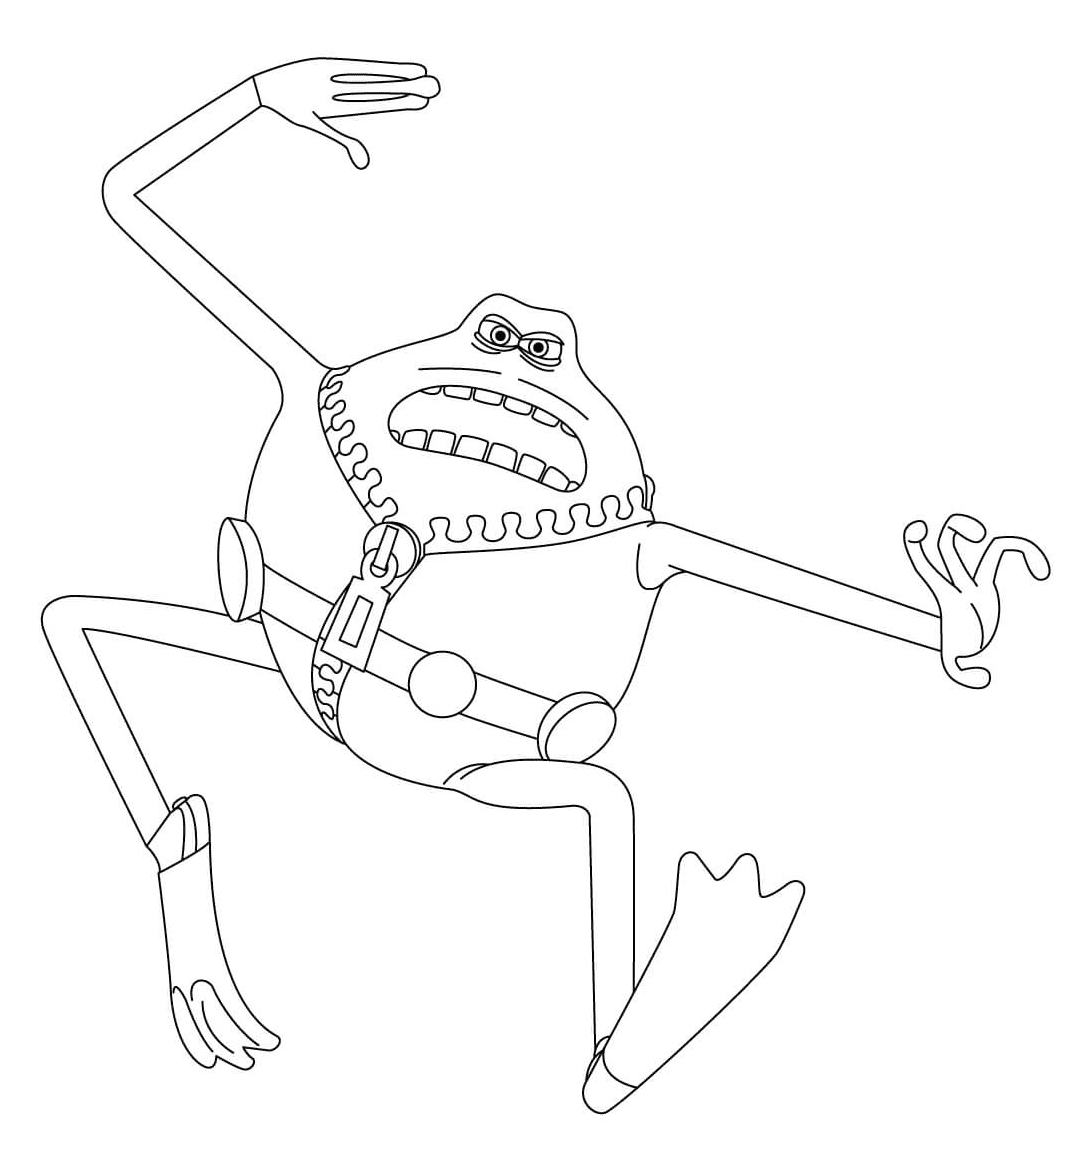 Le Frog Coloring Page